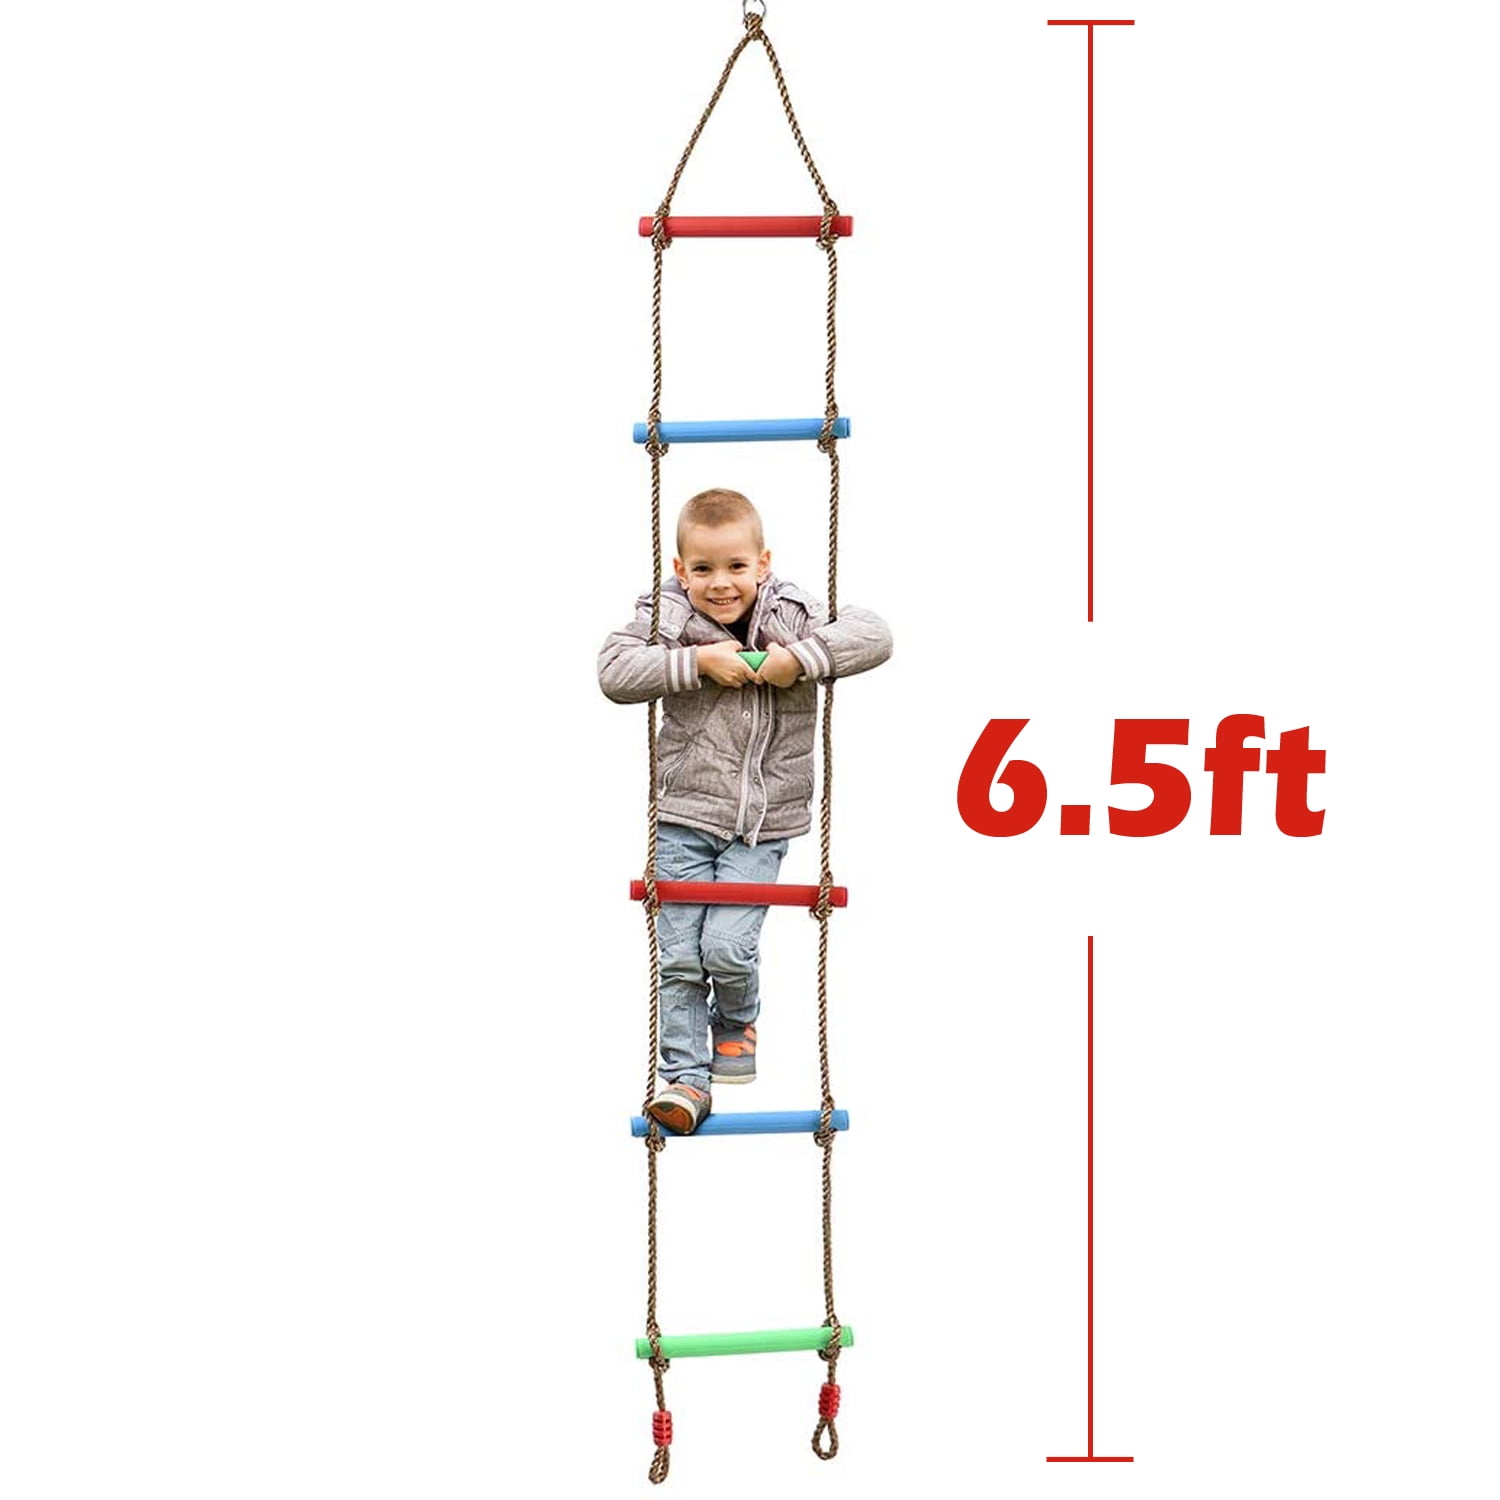 Sturdy Rope Ladder for Kids Indoor or Outdoor Play Children Hanging Ladder 